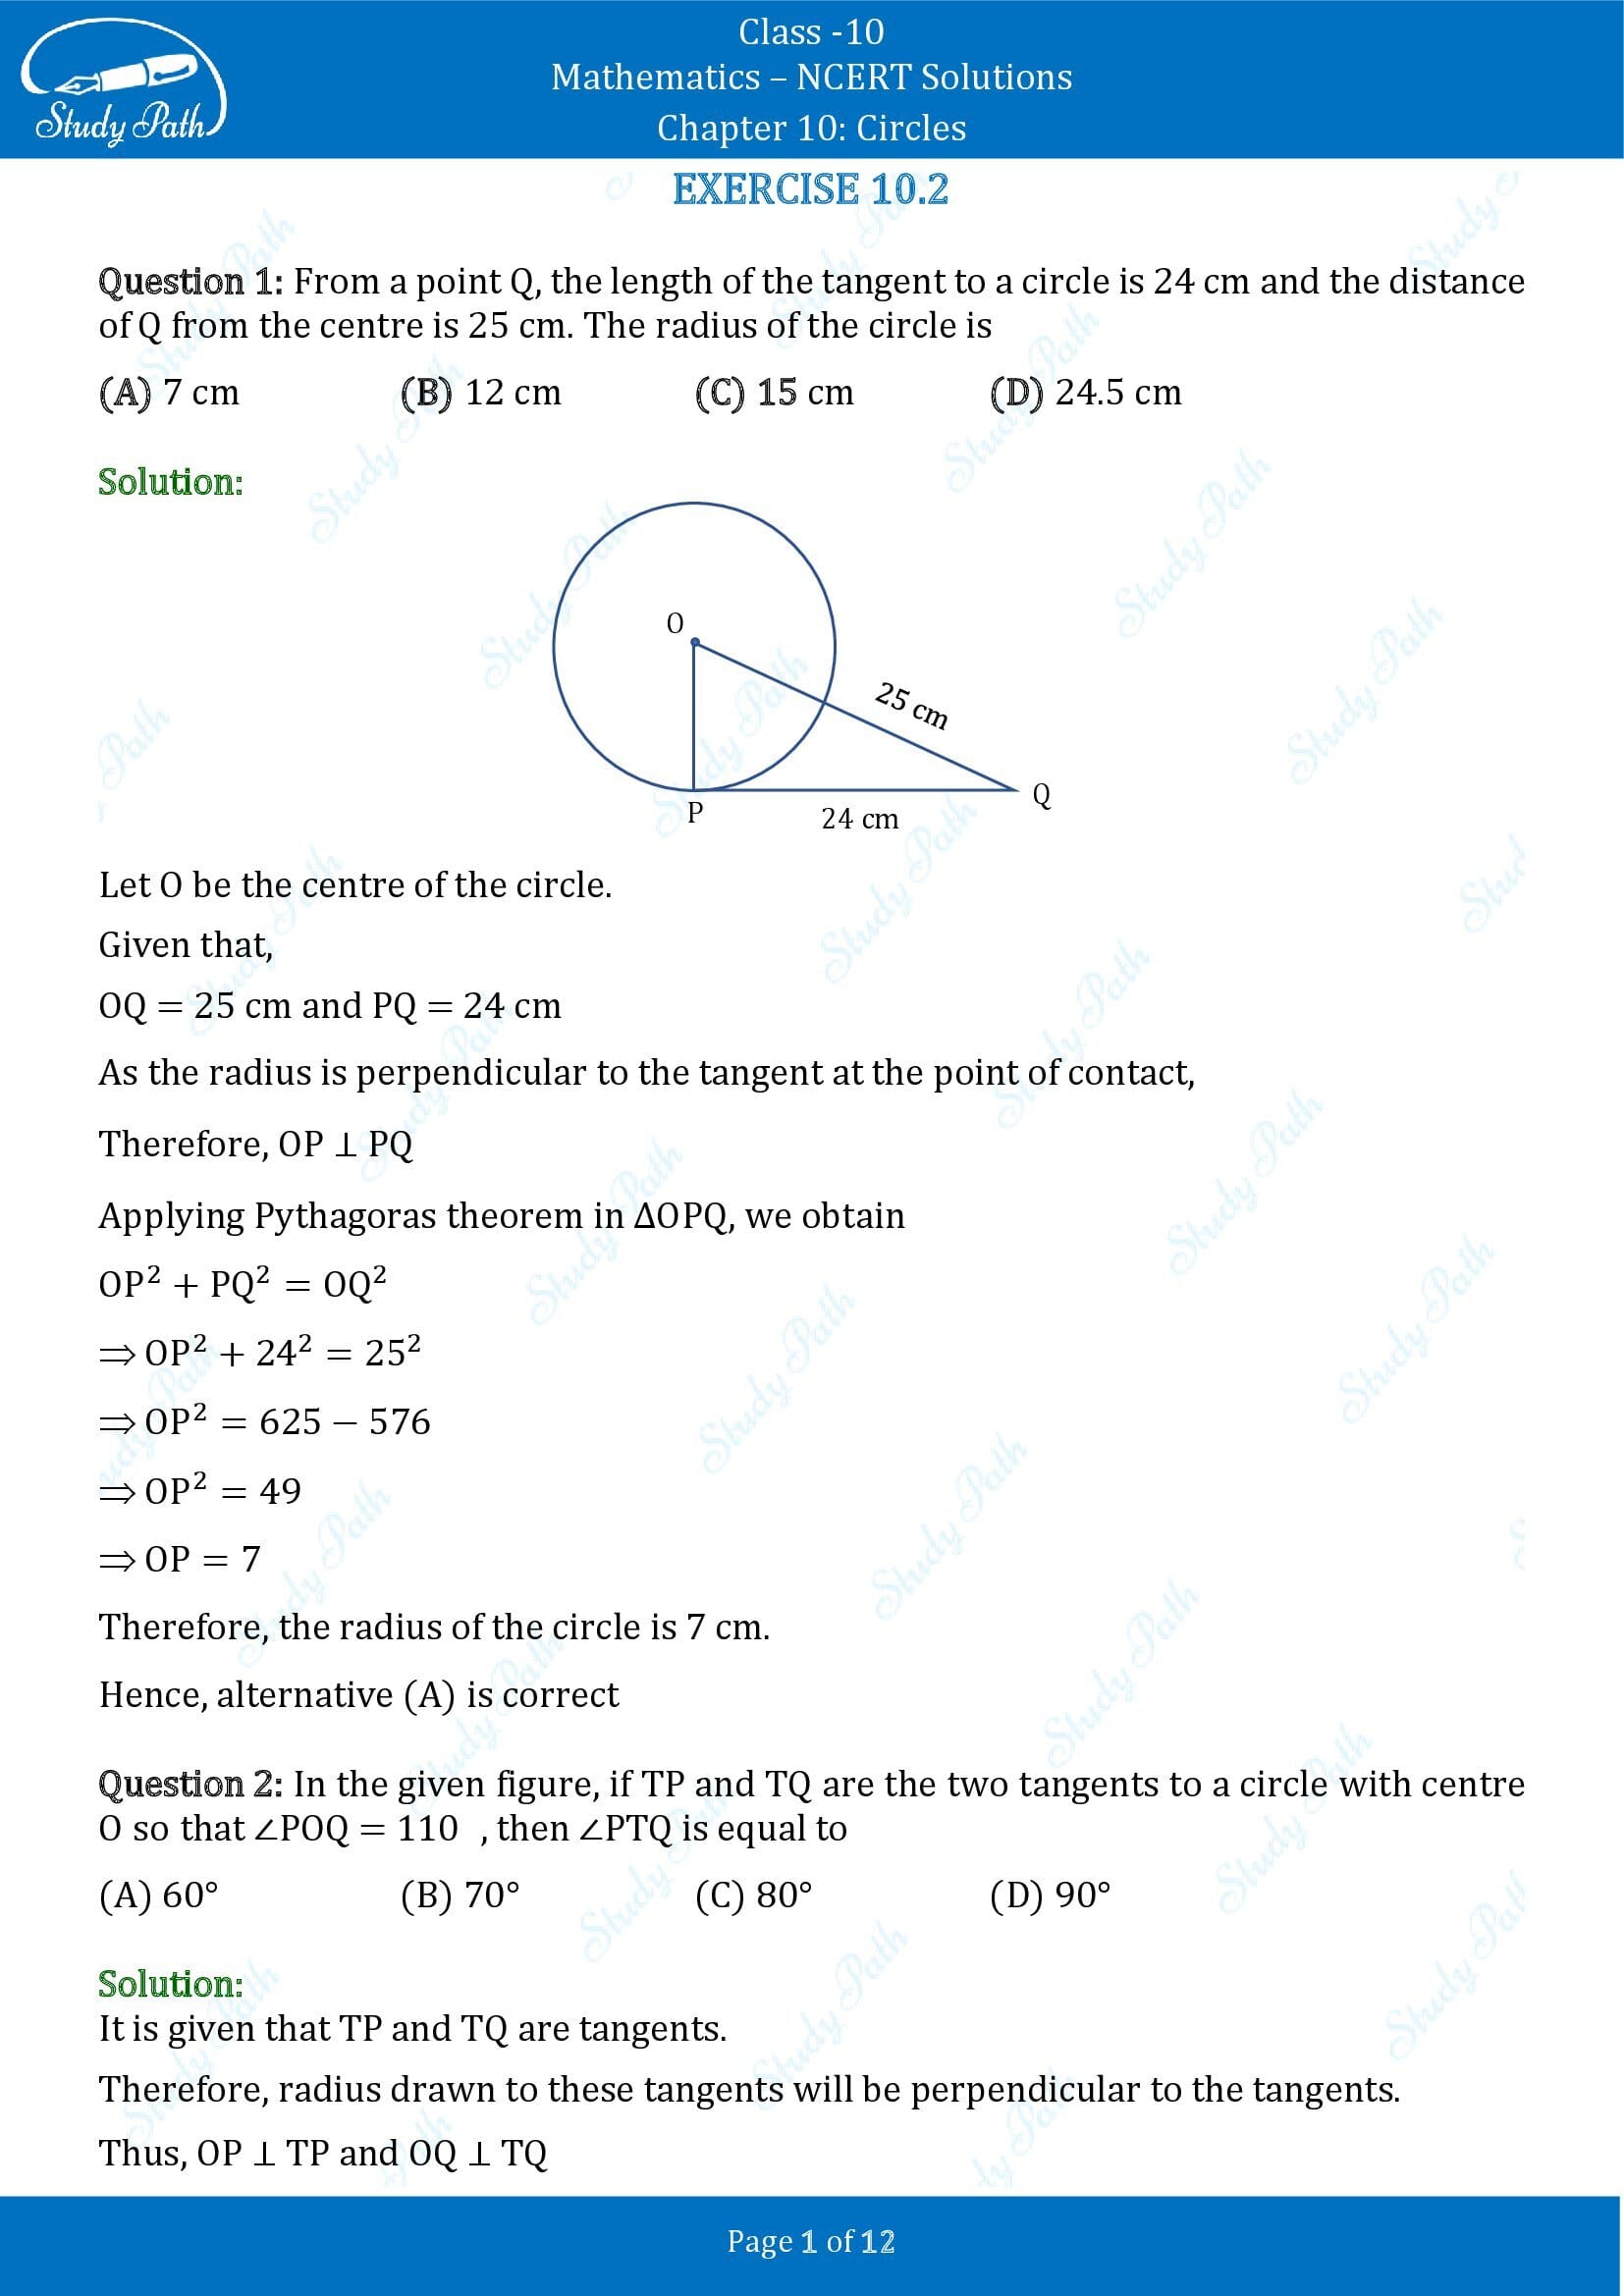 NCERT Solutions for Class 10 Maths Chapter 10 Circles Exercise 10.2 00001